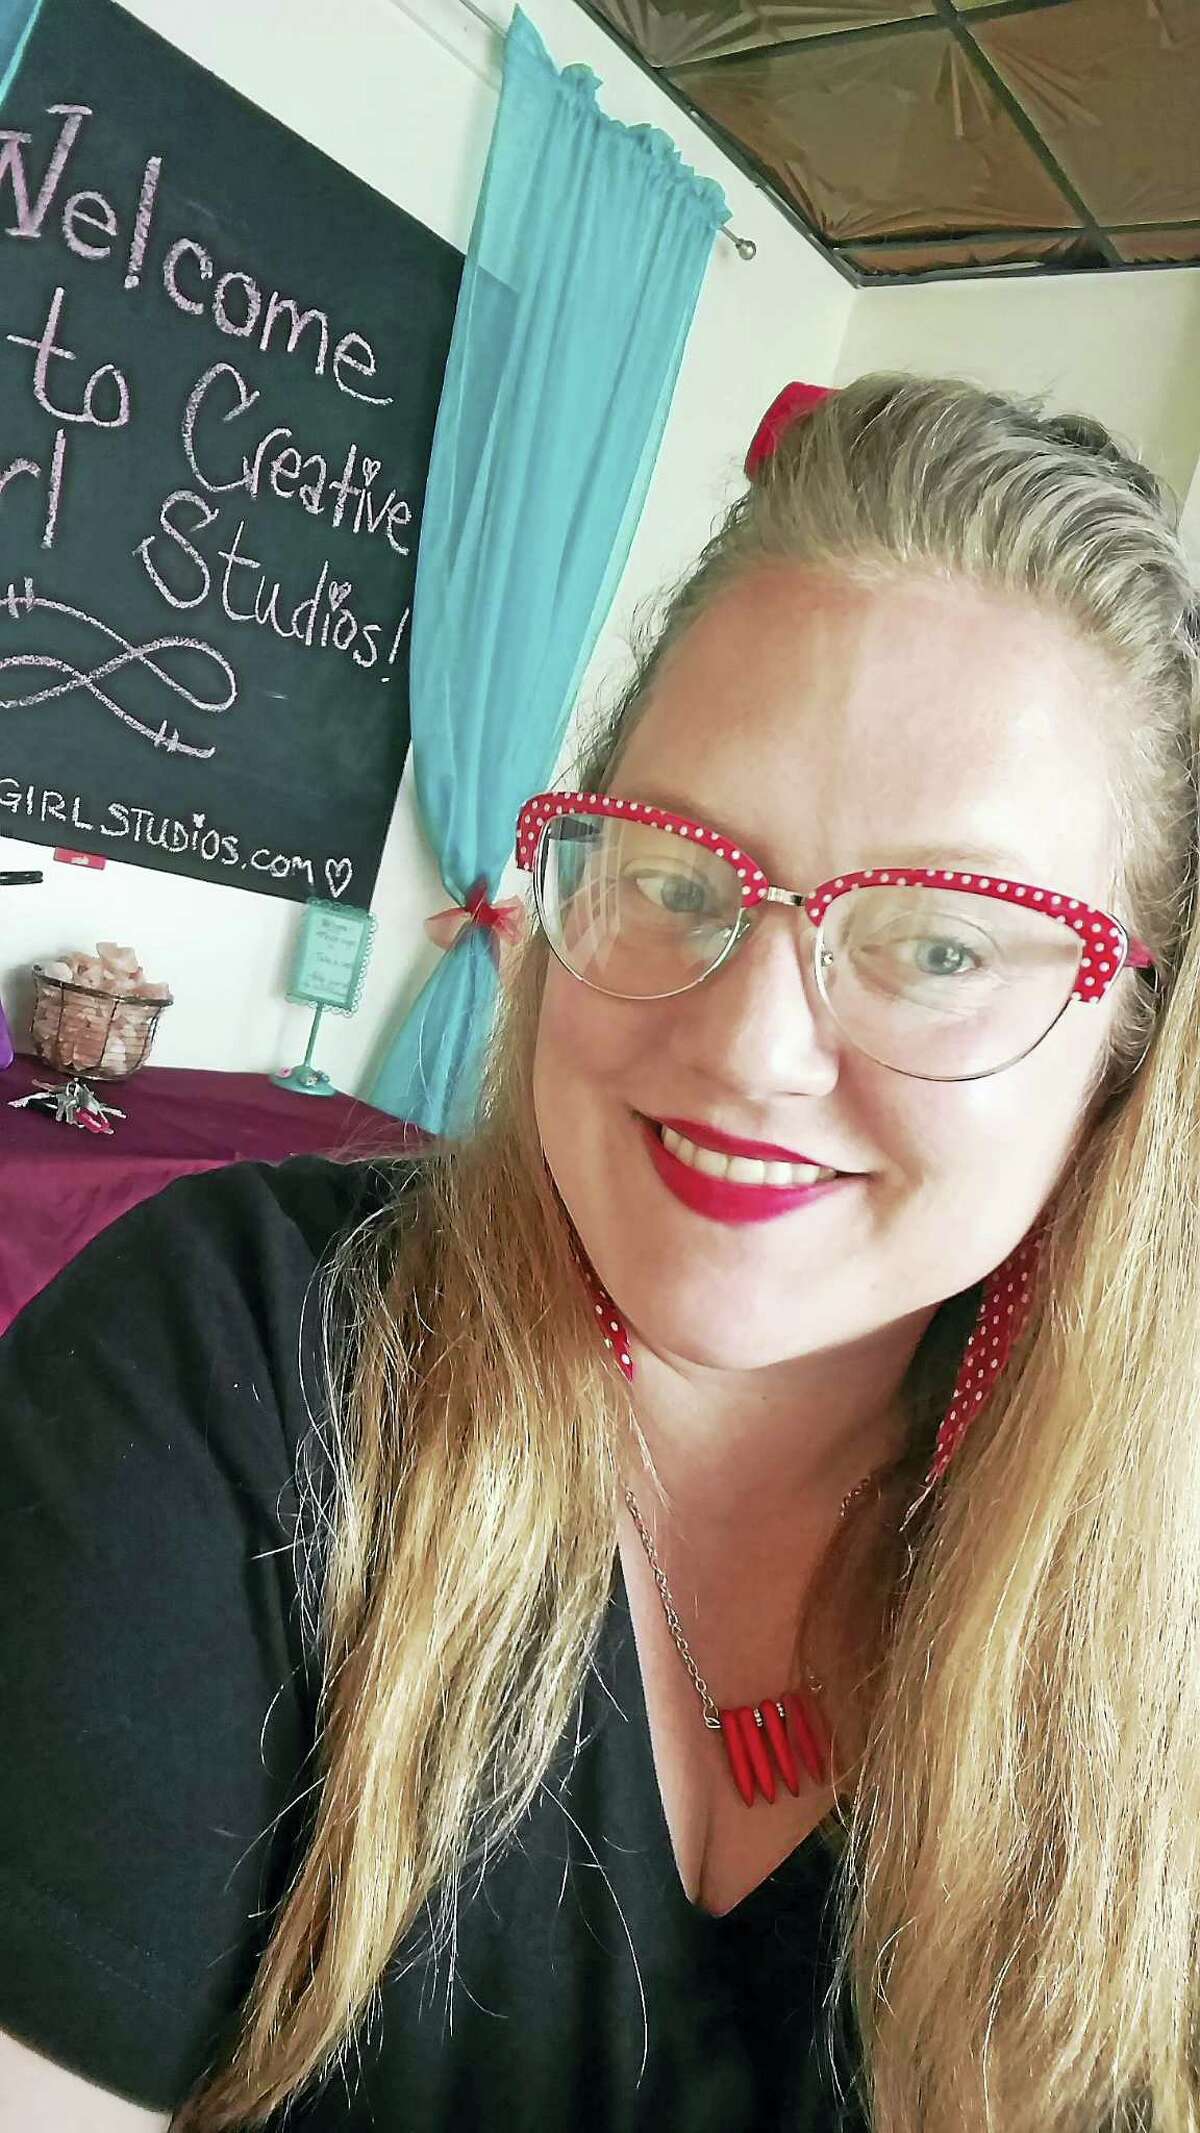 Laurie-Lynne Zlotowski of Meriden, who teaches arts and crafts classes throughout the Connecticut, is owner of Creative Girl Studios on Main Street in Middletown.